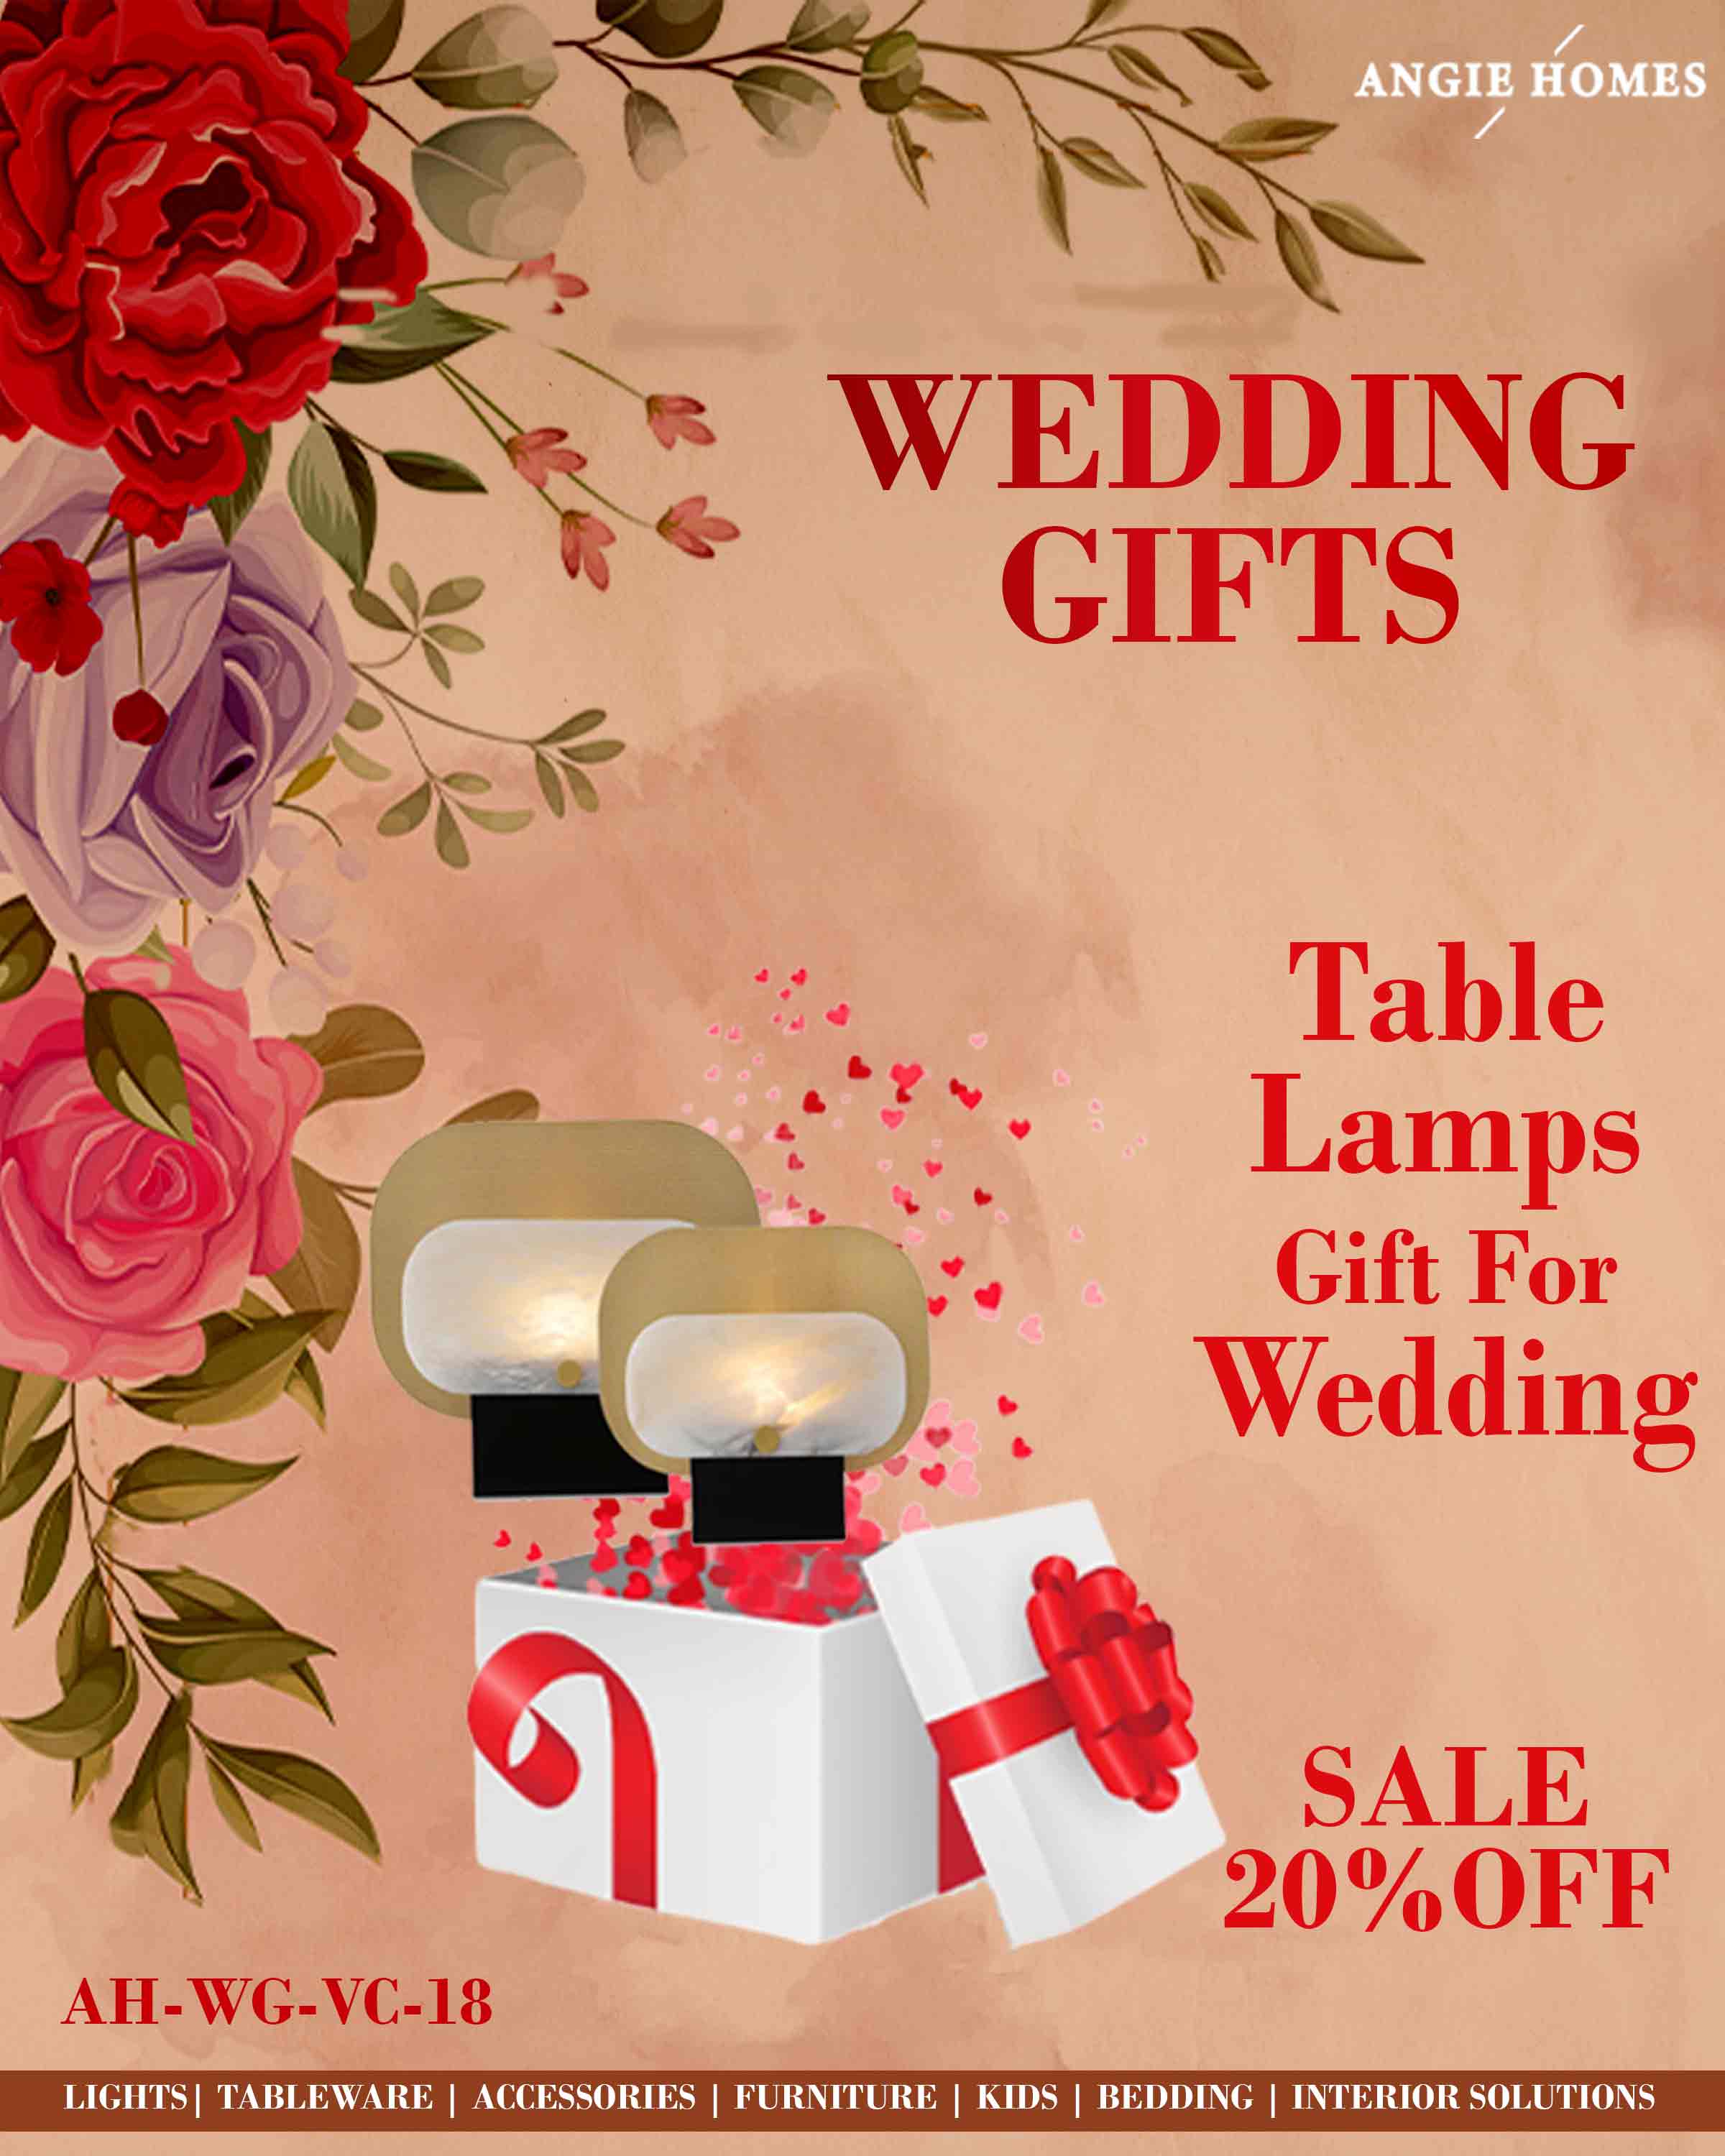 TABLE LAMPS FOR WEDDING GIFTS | MARRIAGE GIFT VOUCHER | RETURN GIFTTING CARD ANGIE HOMES